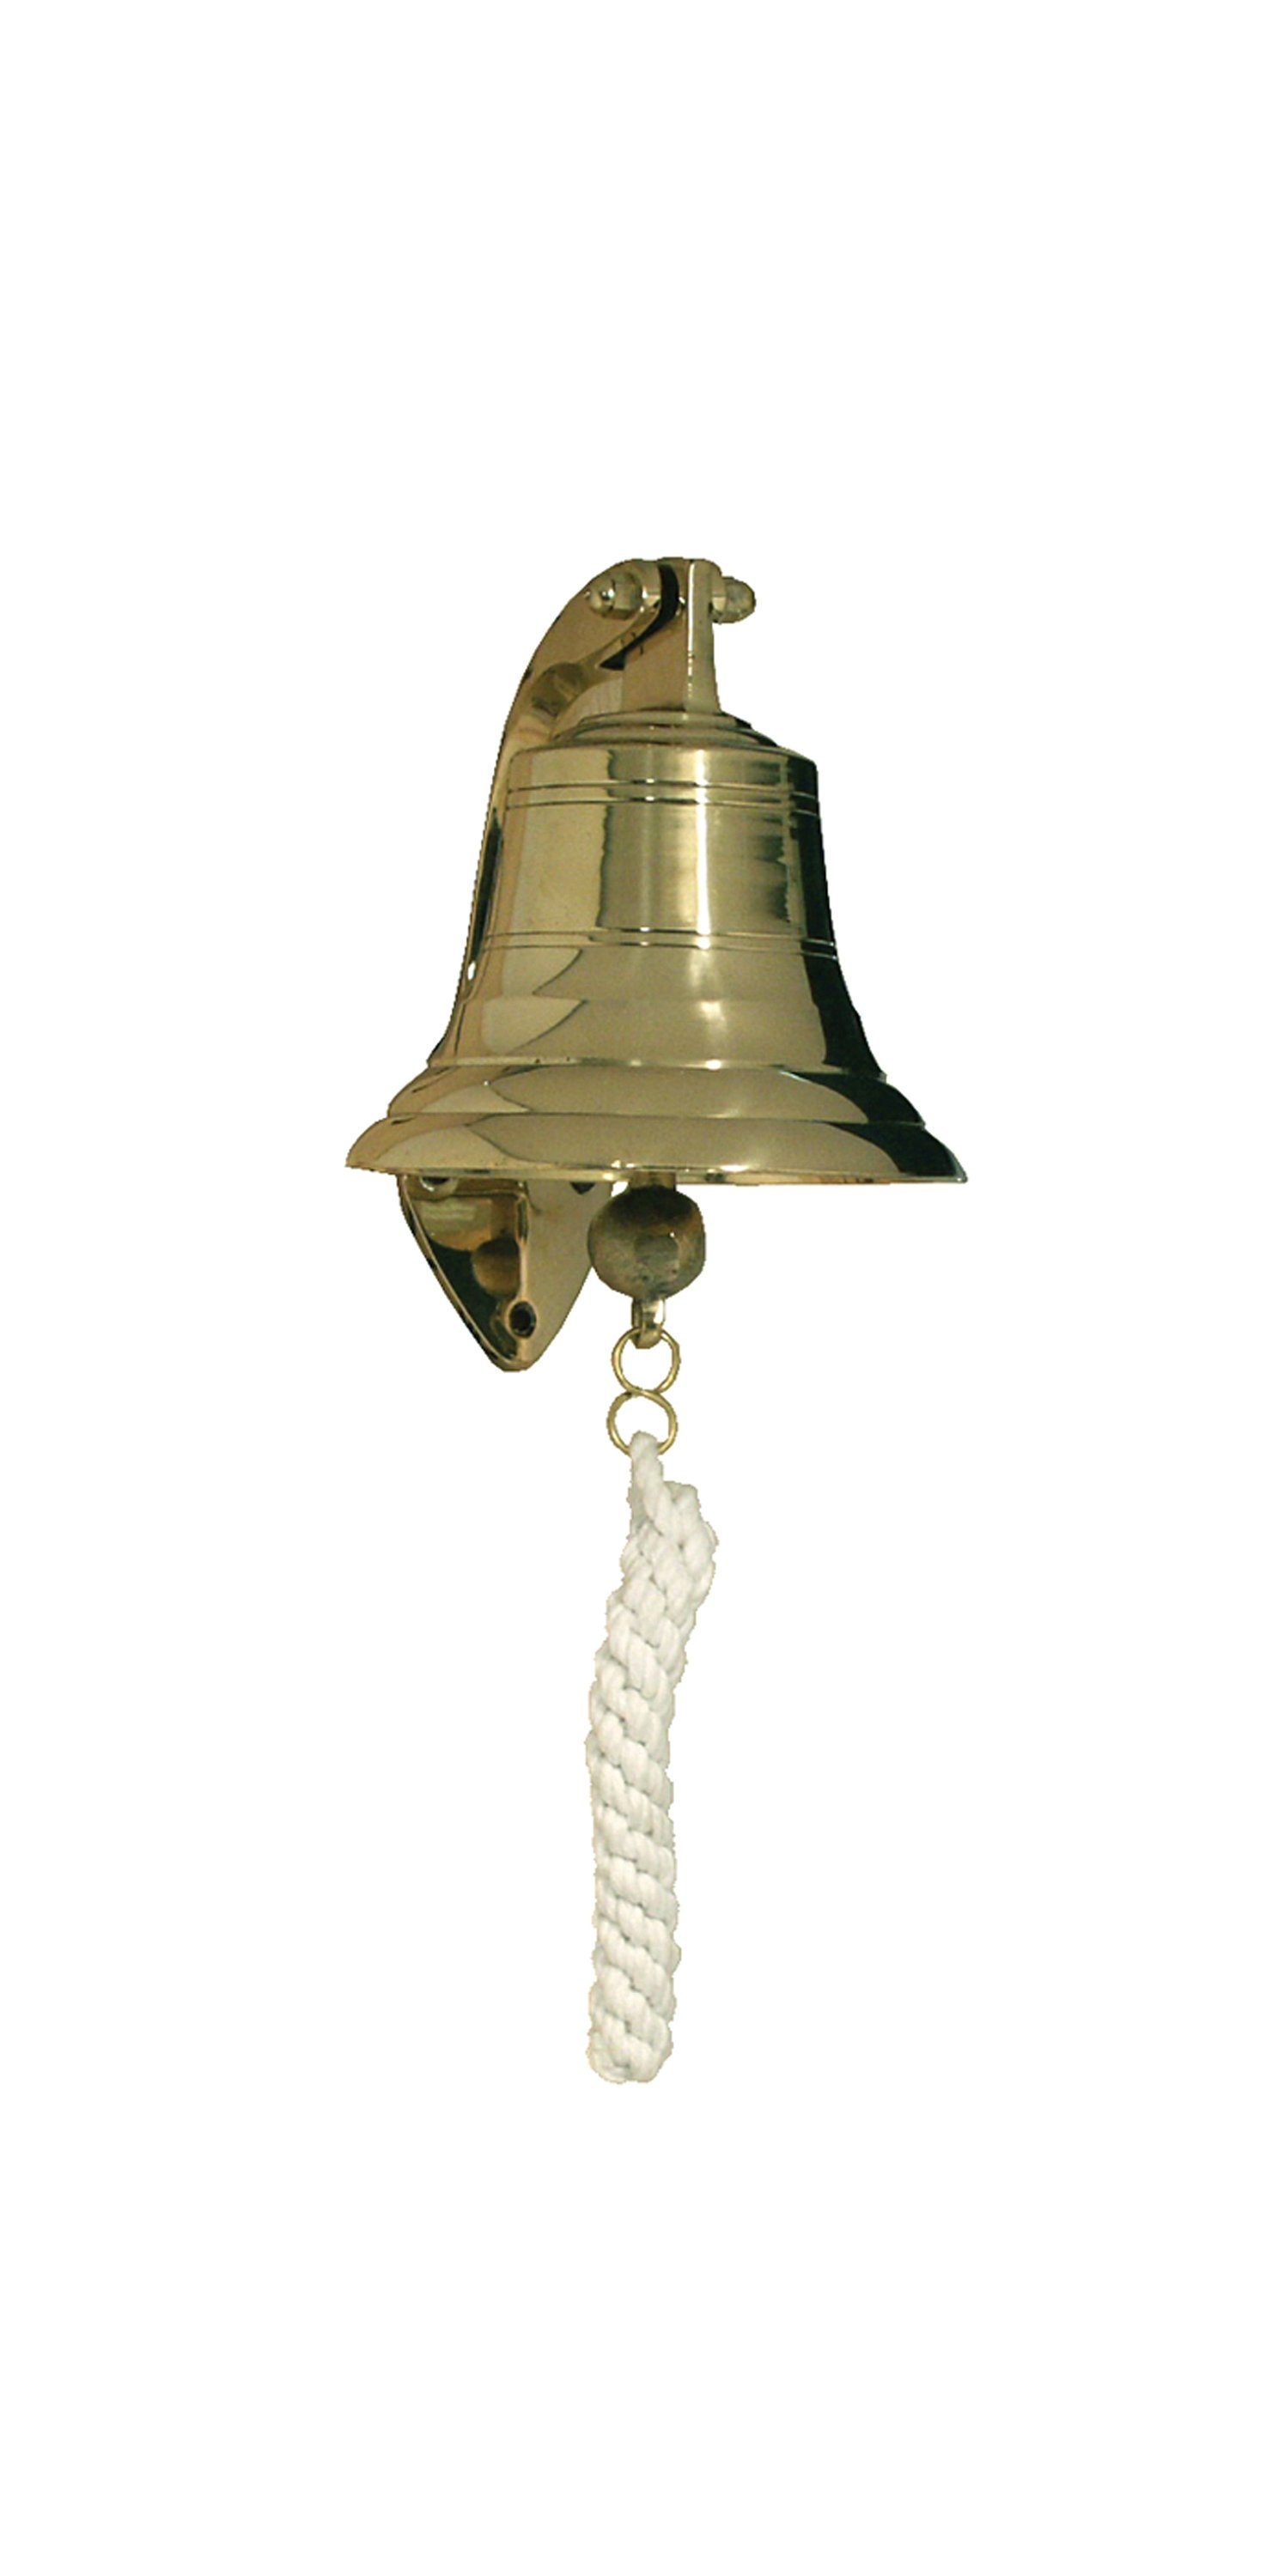 Brass Plated Hanging Ship's Bell - Discover Unique Home Decor